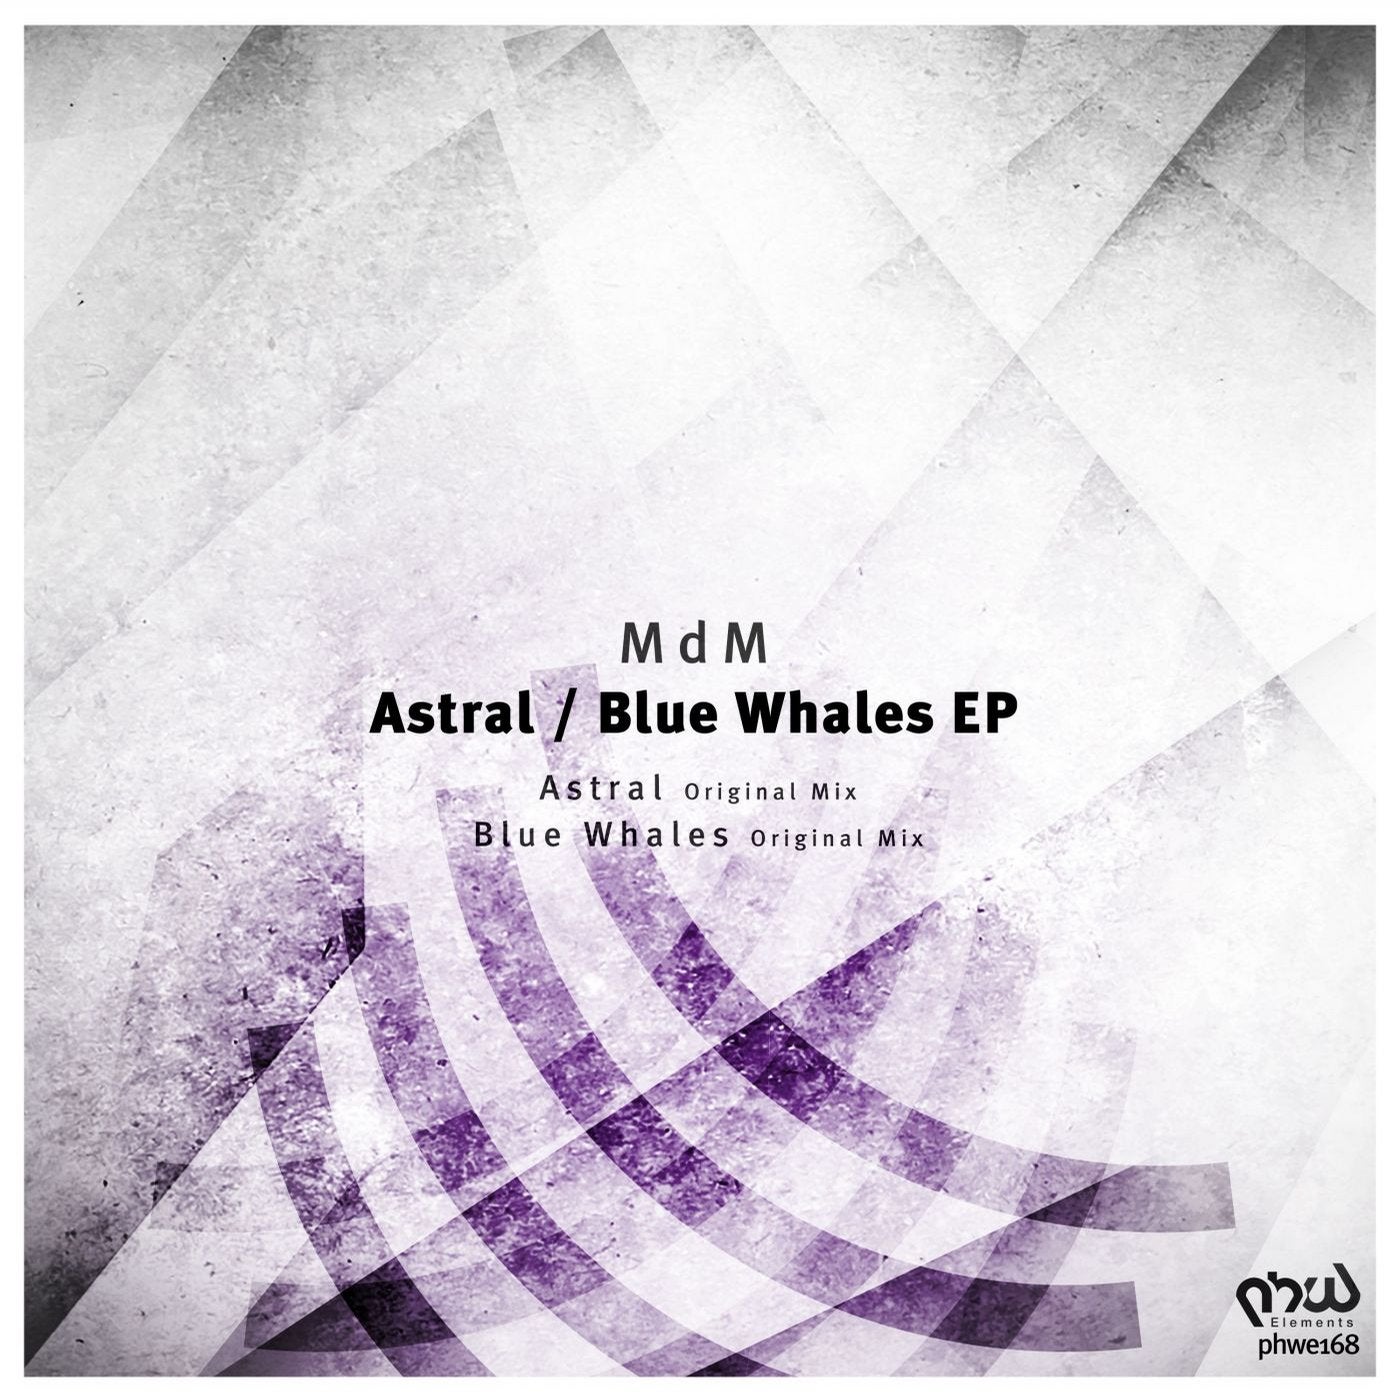 Astral / Blue Whales